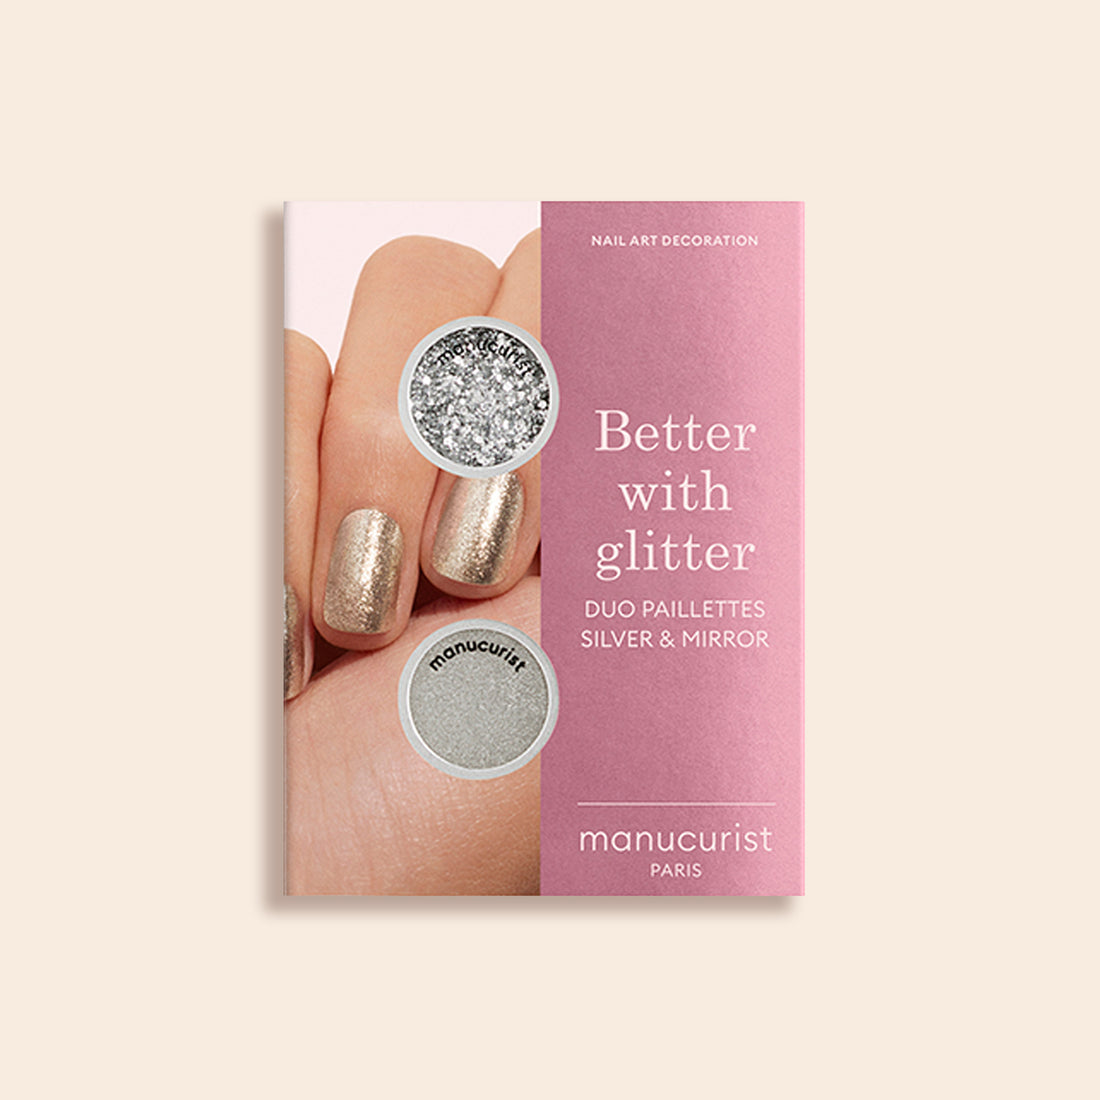 Duo Paillettes Silver &amp; Mirror